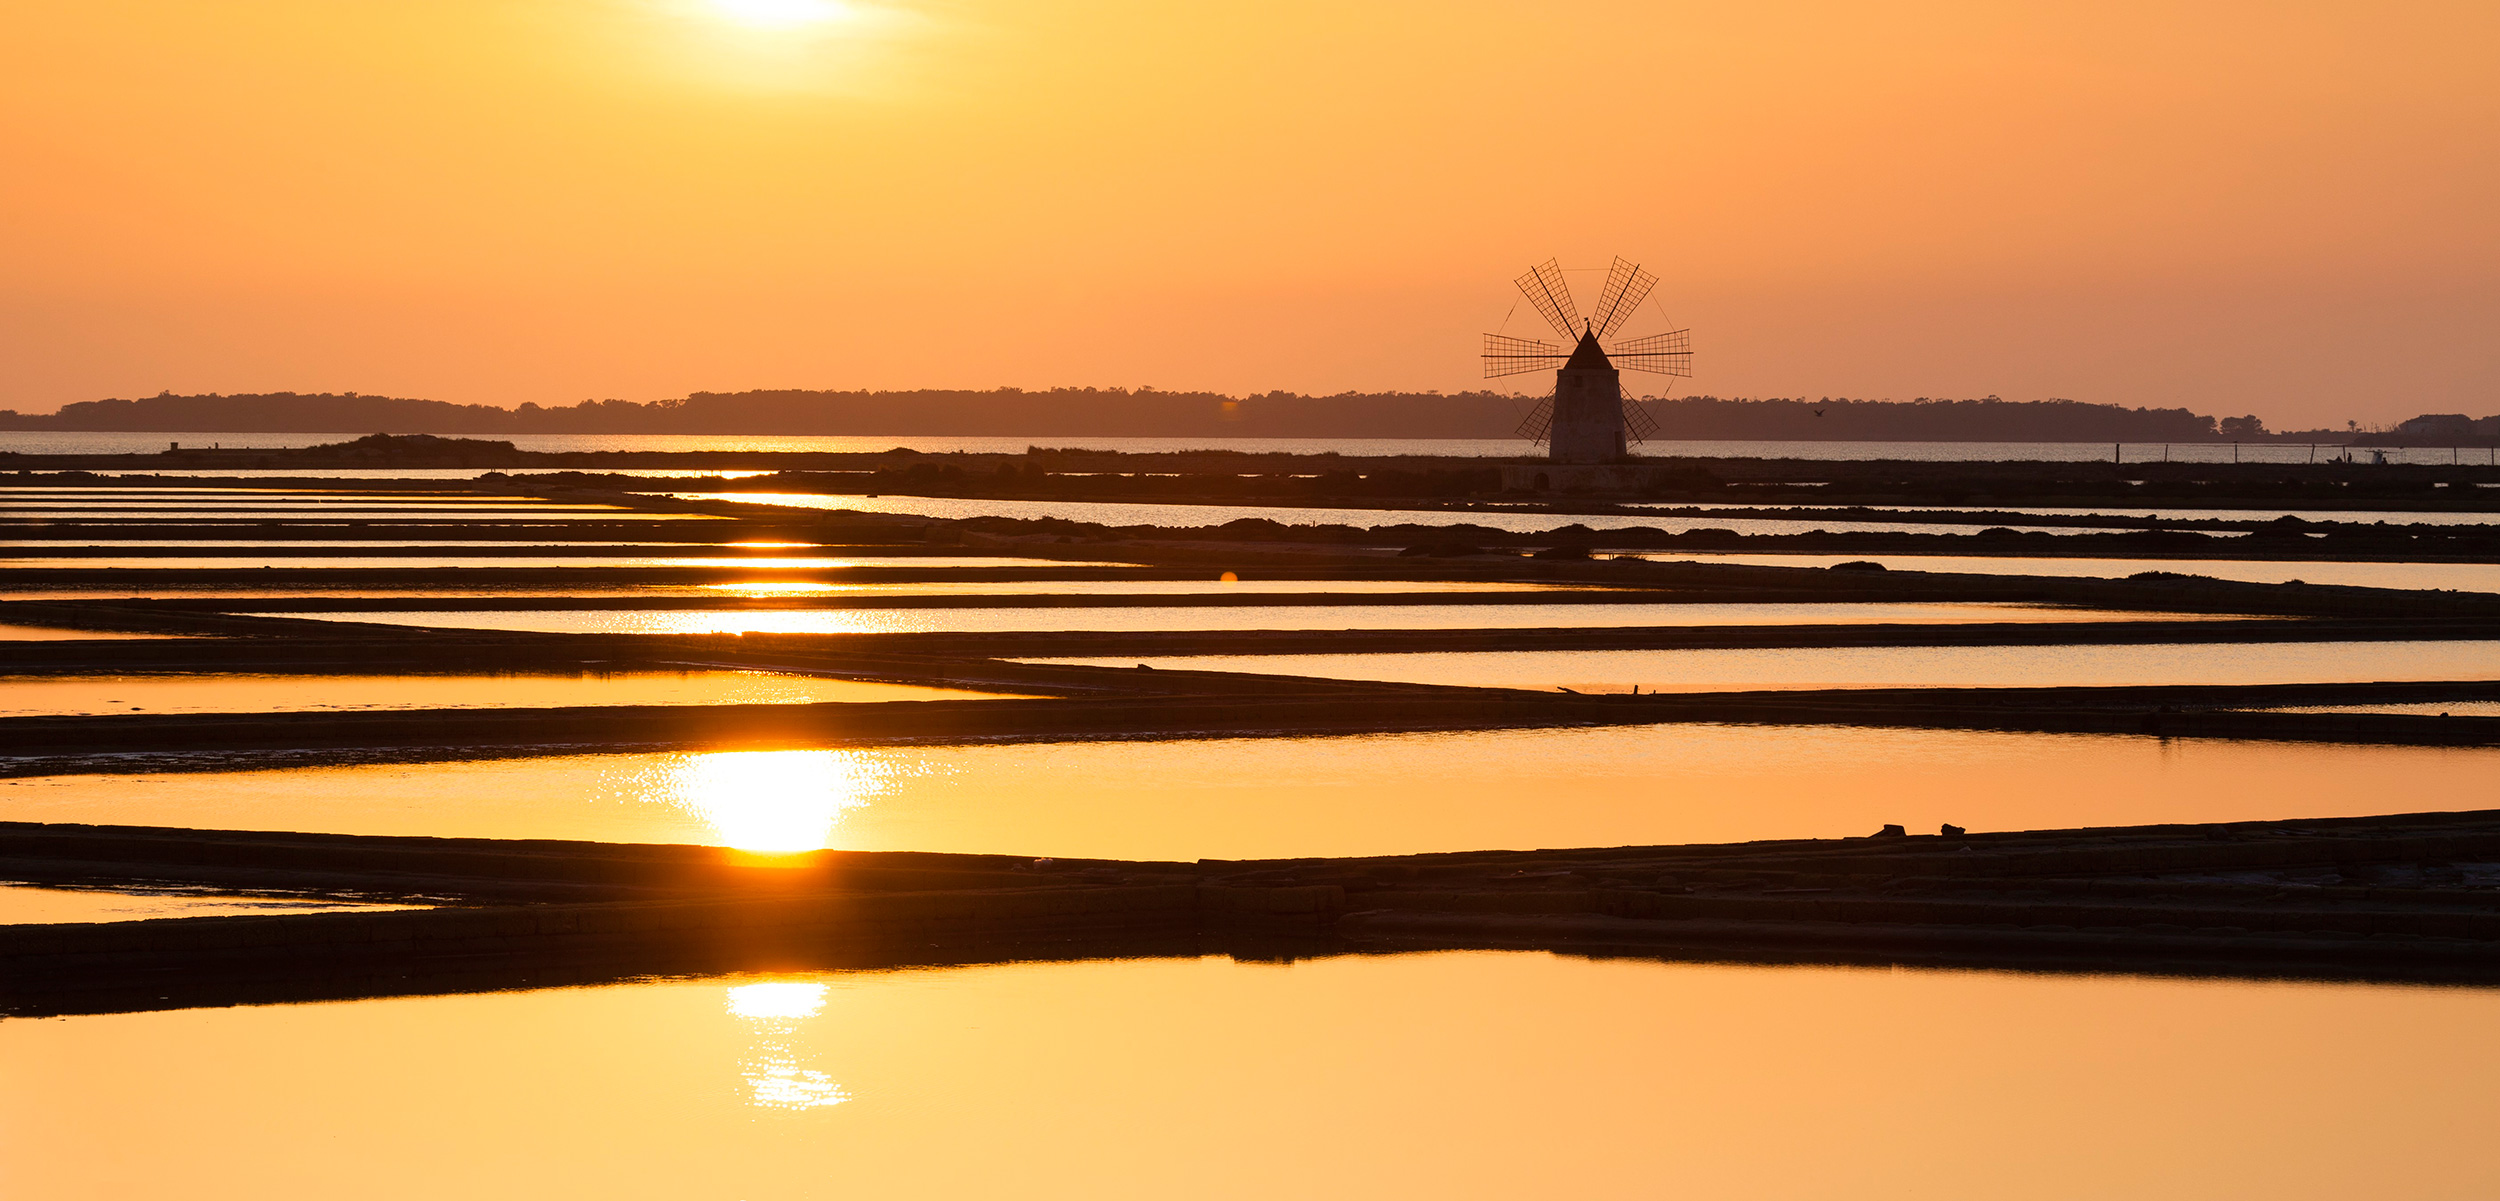 Sunset over the salt flats in Trapani, Sicily. Photo by Frank Lukasseck/Corbis